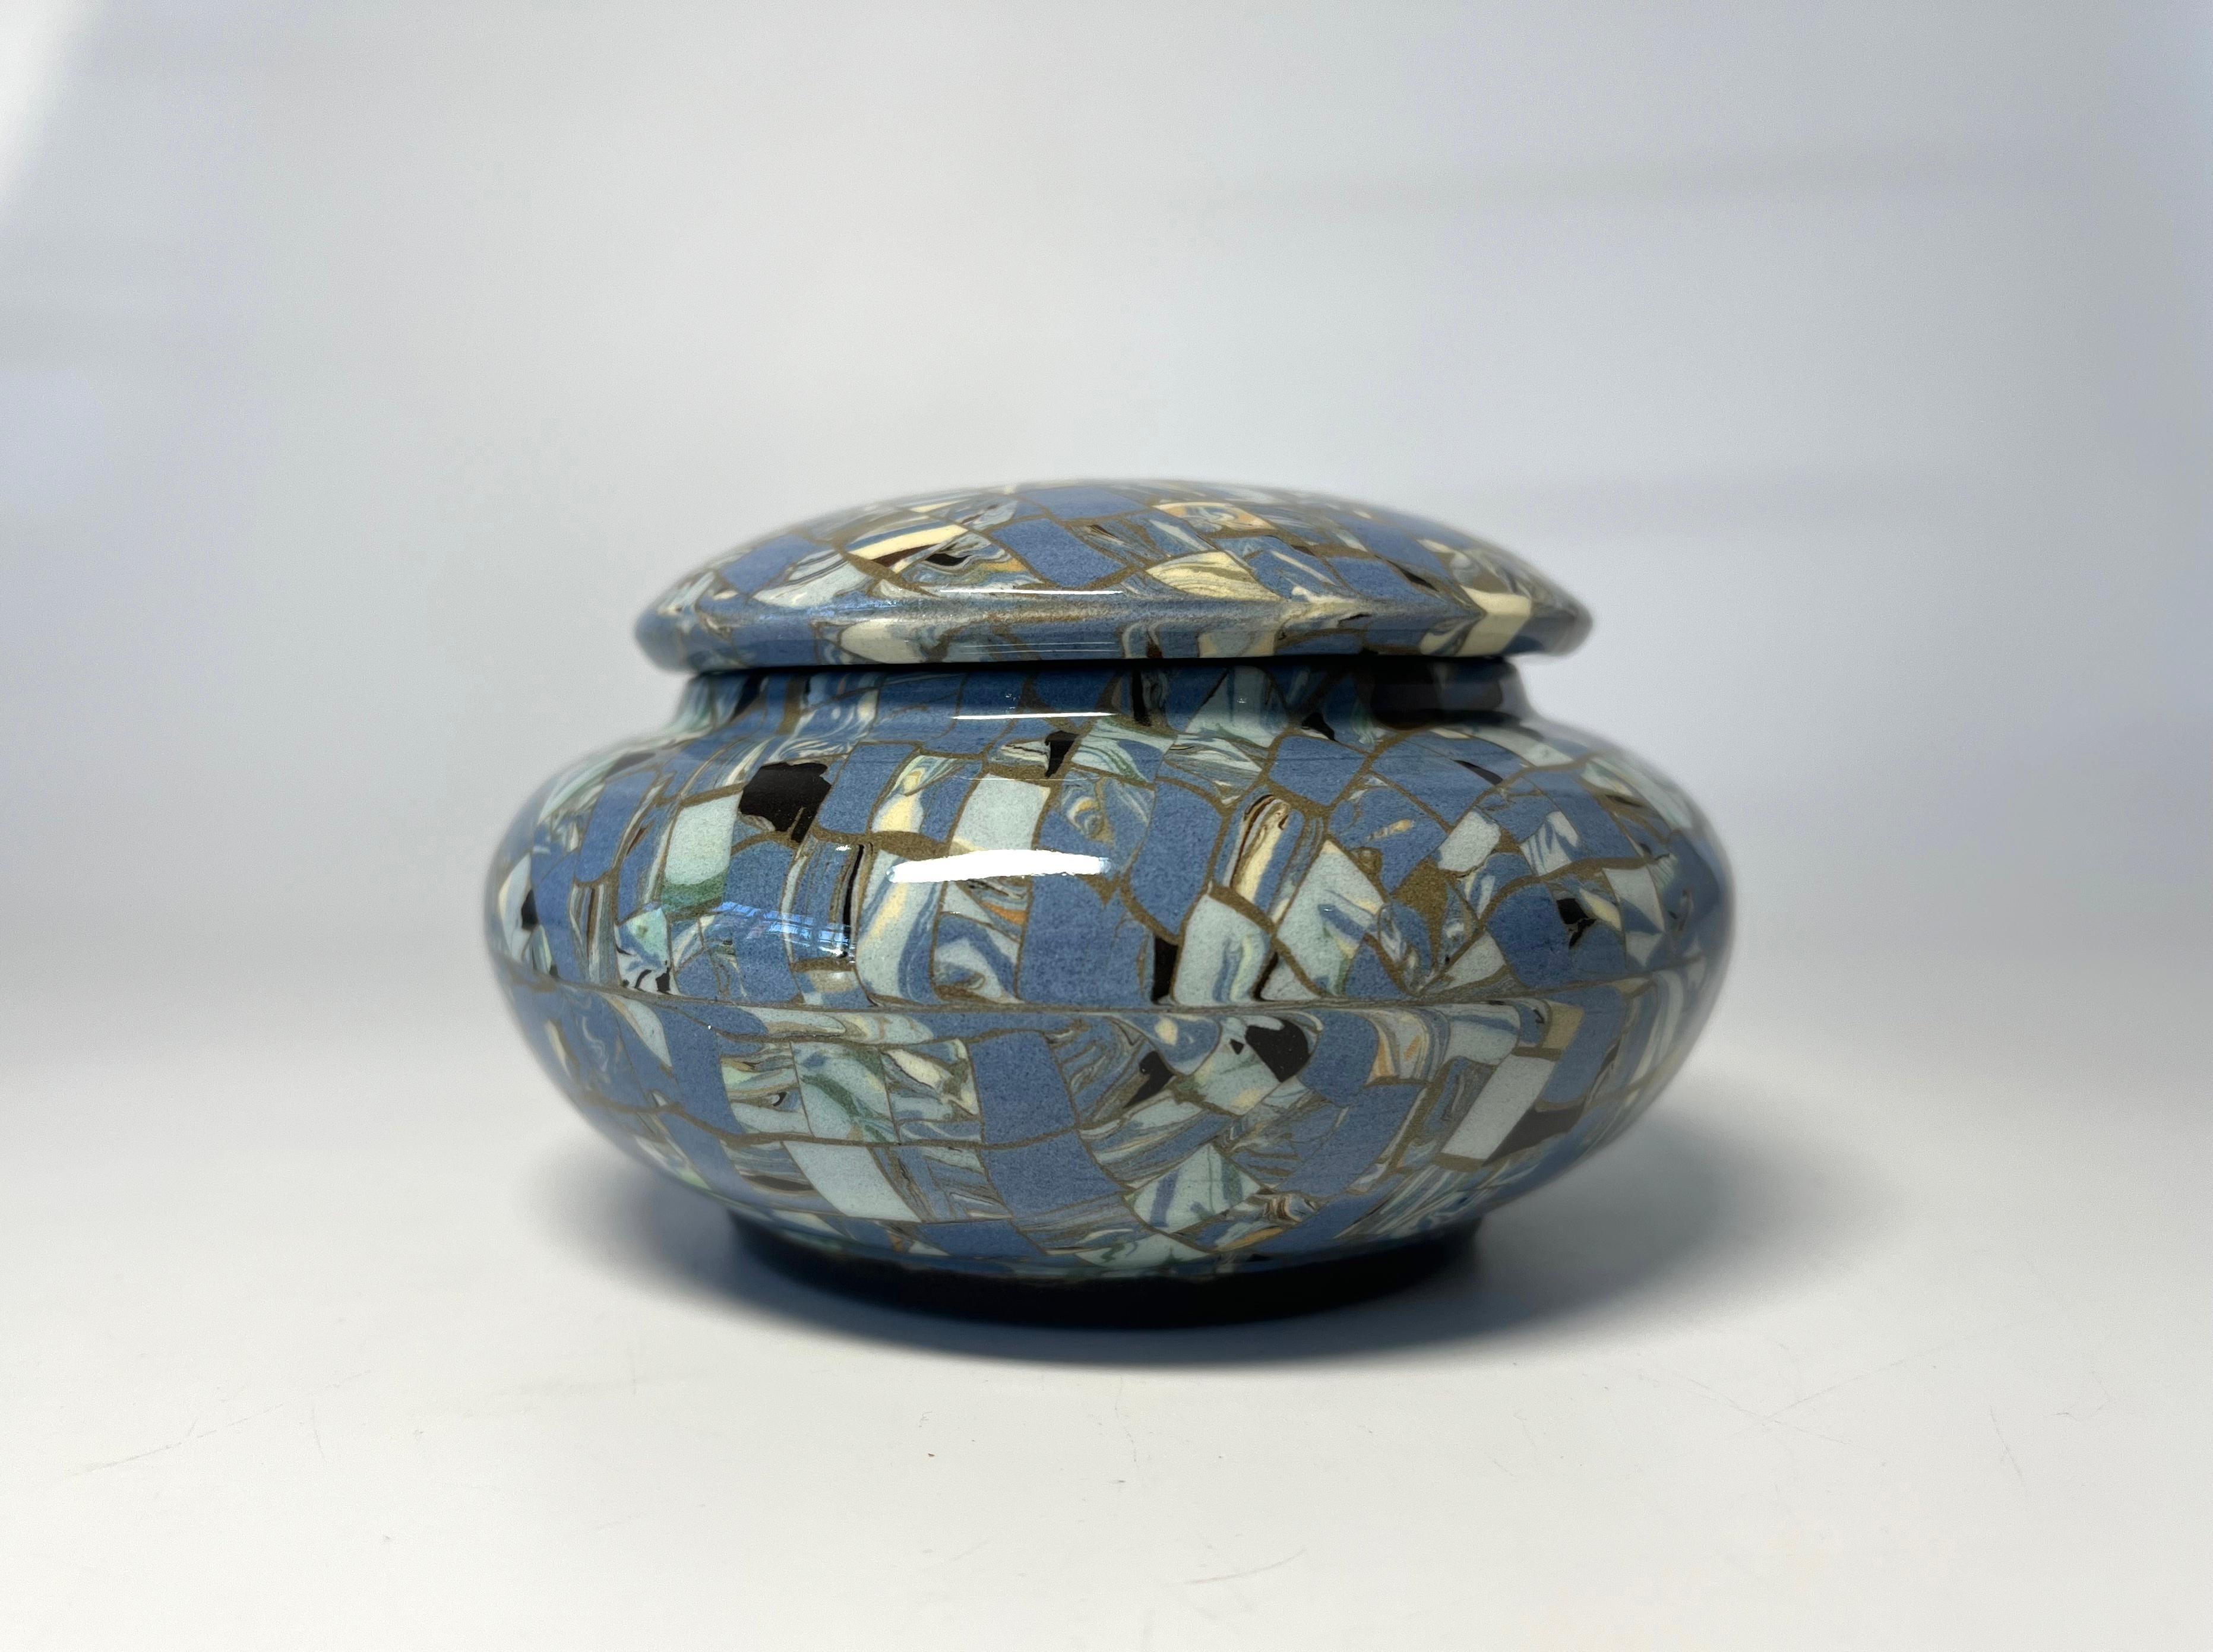 Quietly understated elegant Jean Gerbino for Vallauris, France, ceramic glazed pale blue mosaic lidded pot
Classic form and function with signature mosaic from Gerbino
Circa 1960's
Signed Gerbino  to base
Height 2.5 inch, Diameter 4.3 inch, 
In